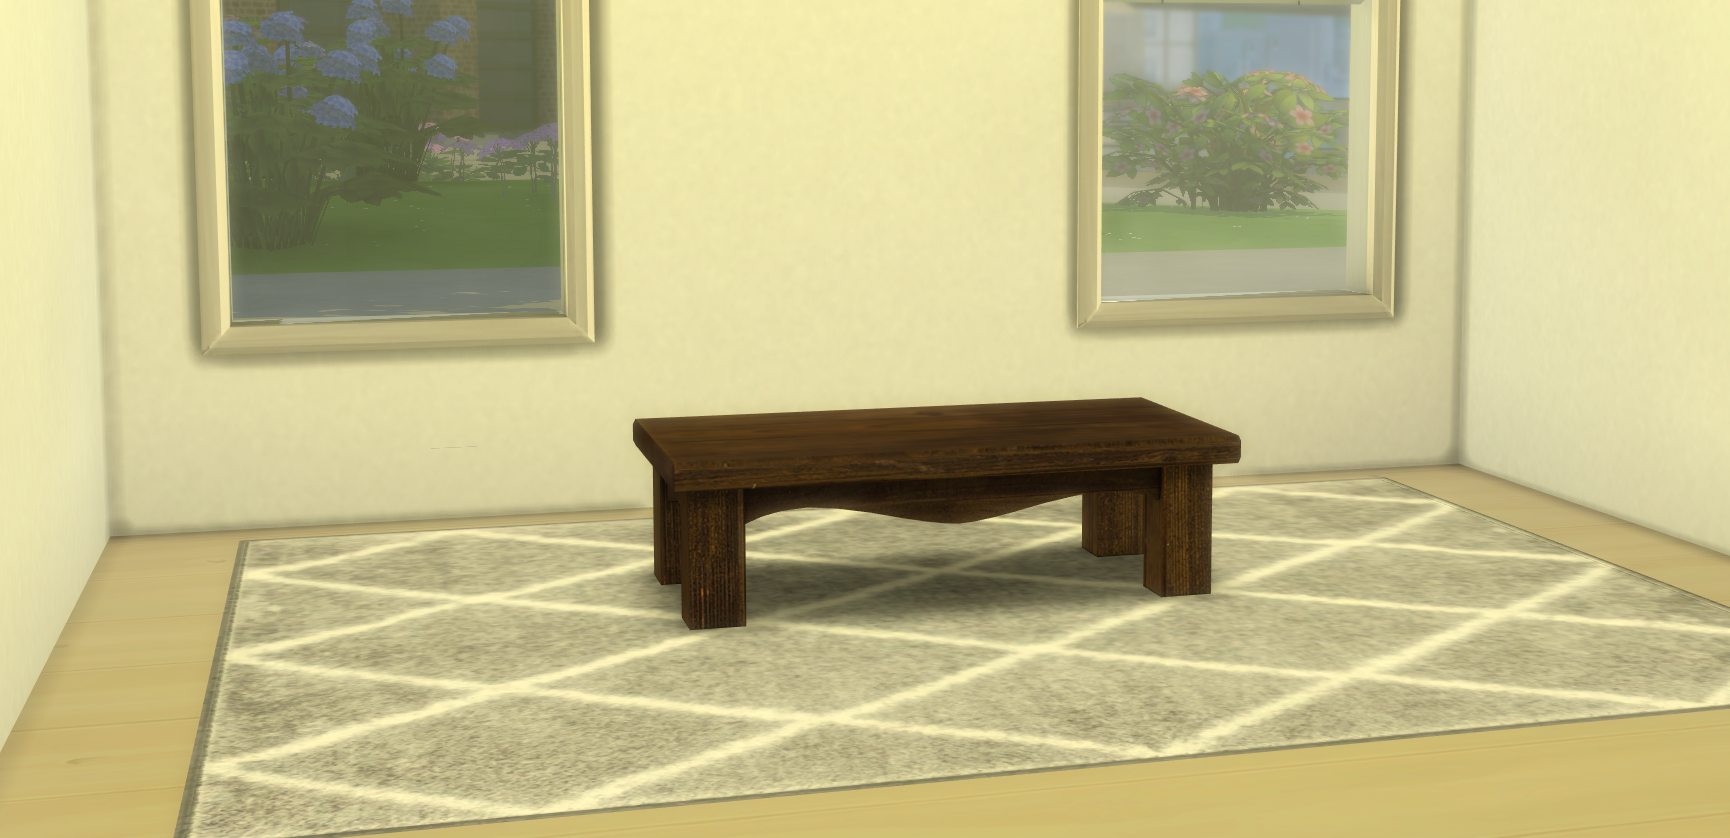 sims 4 furniture mods & cc - Coffee table